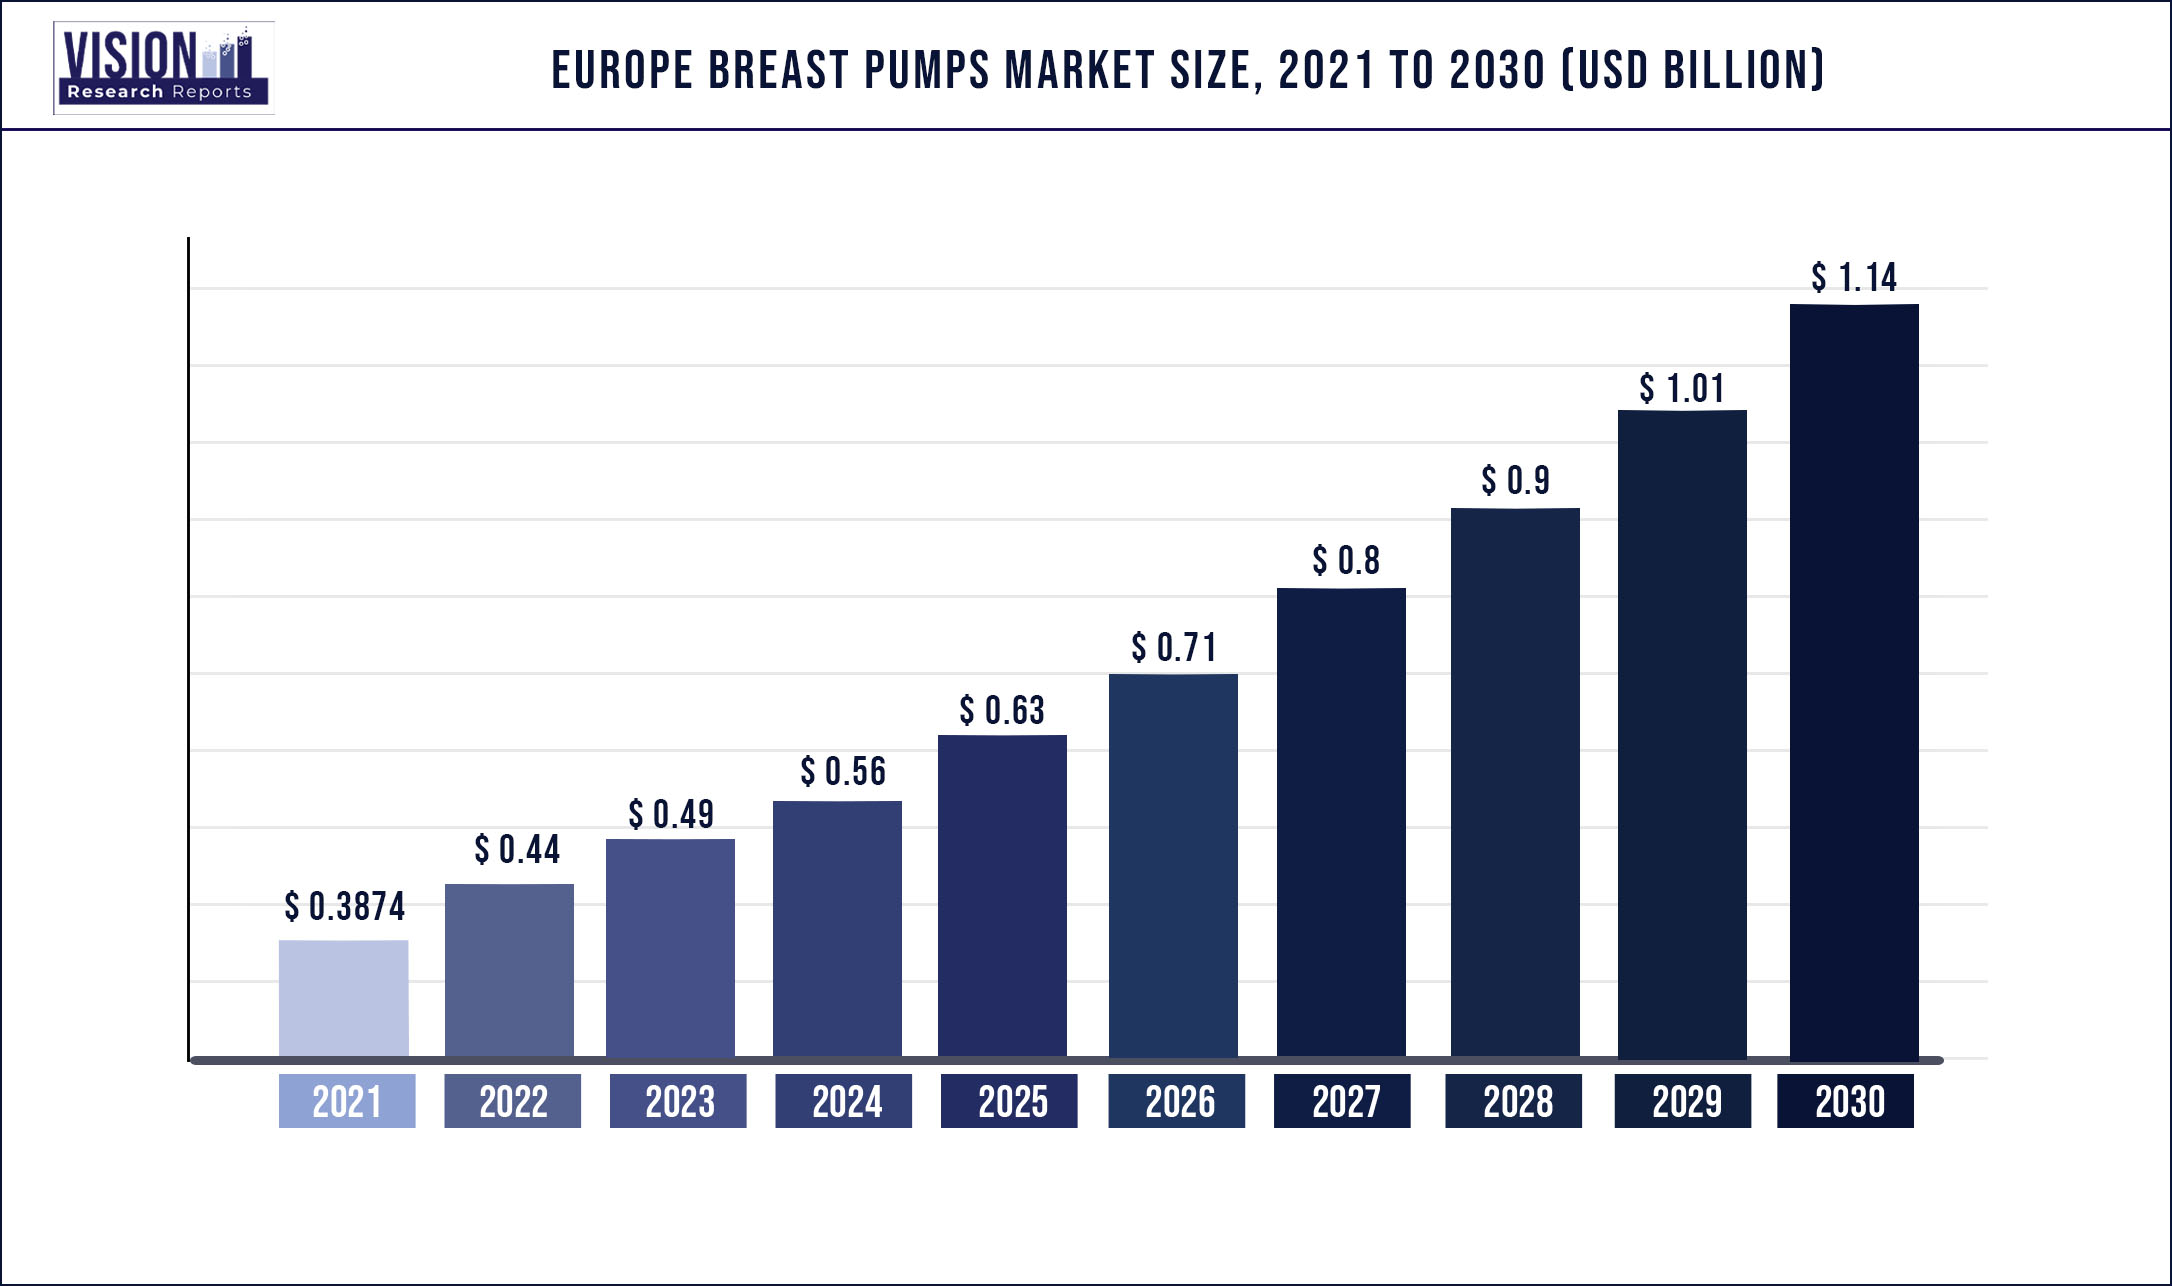 Europe Breast Pumps Market Size 2021 to 2030